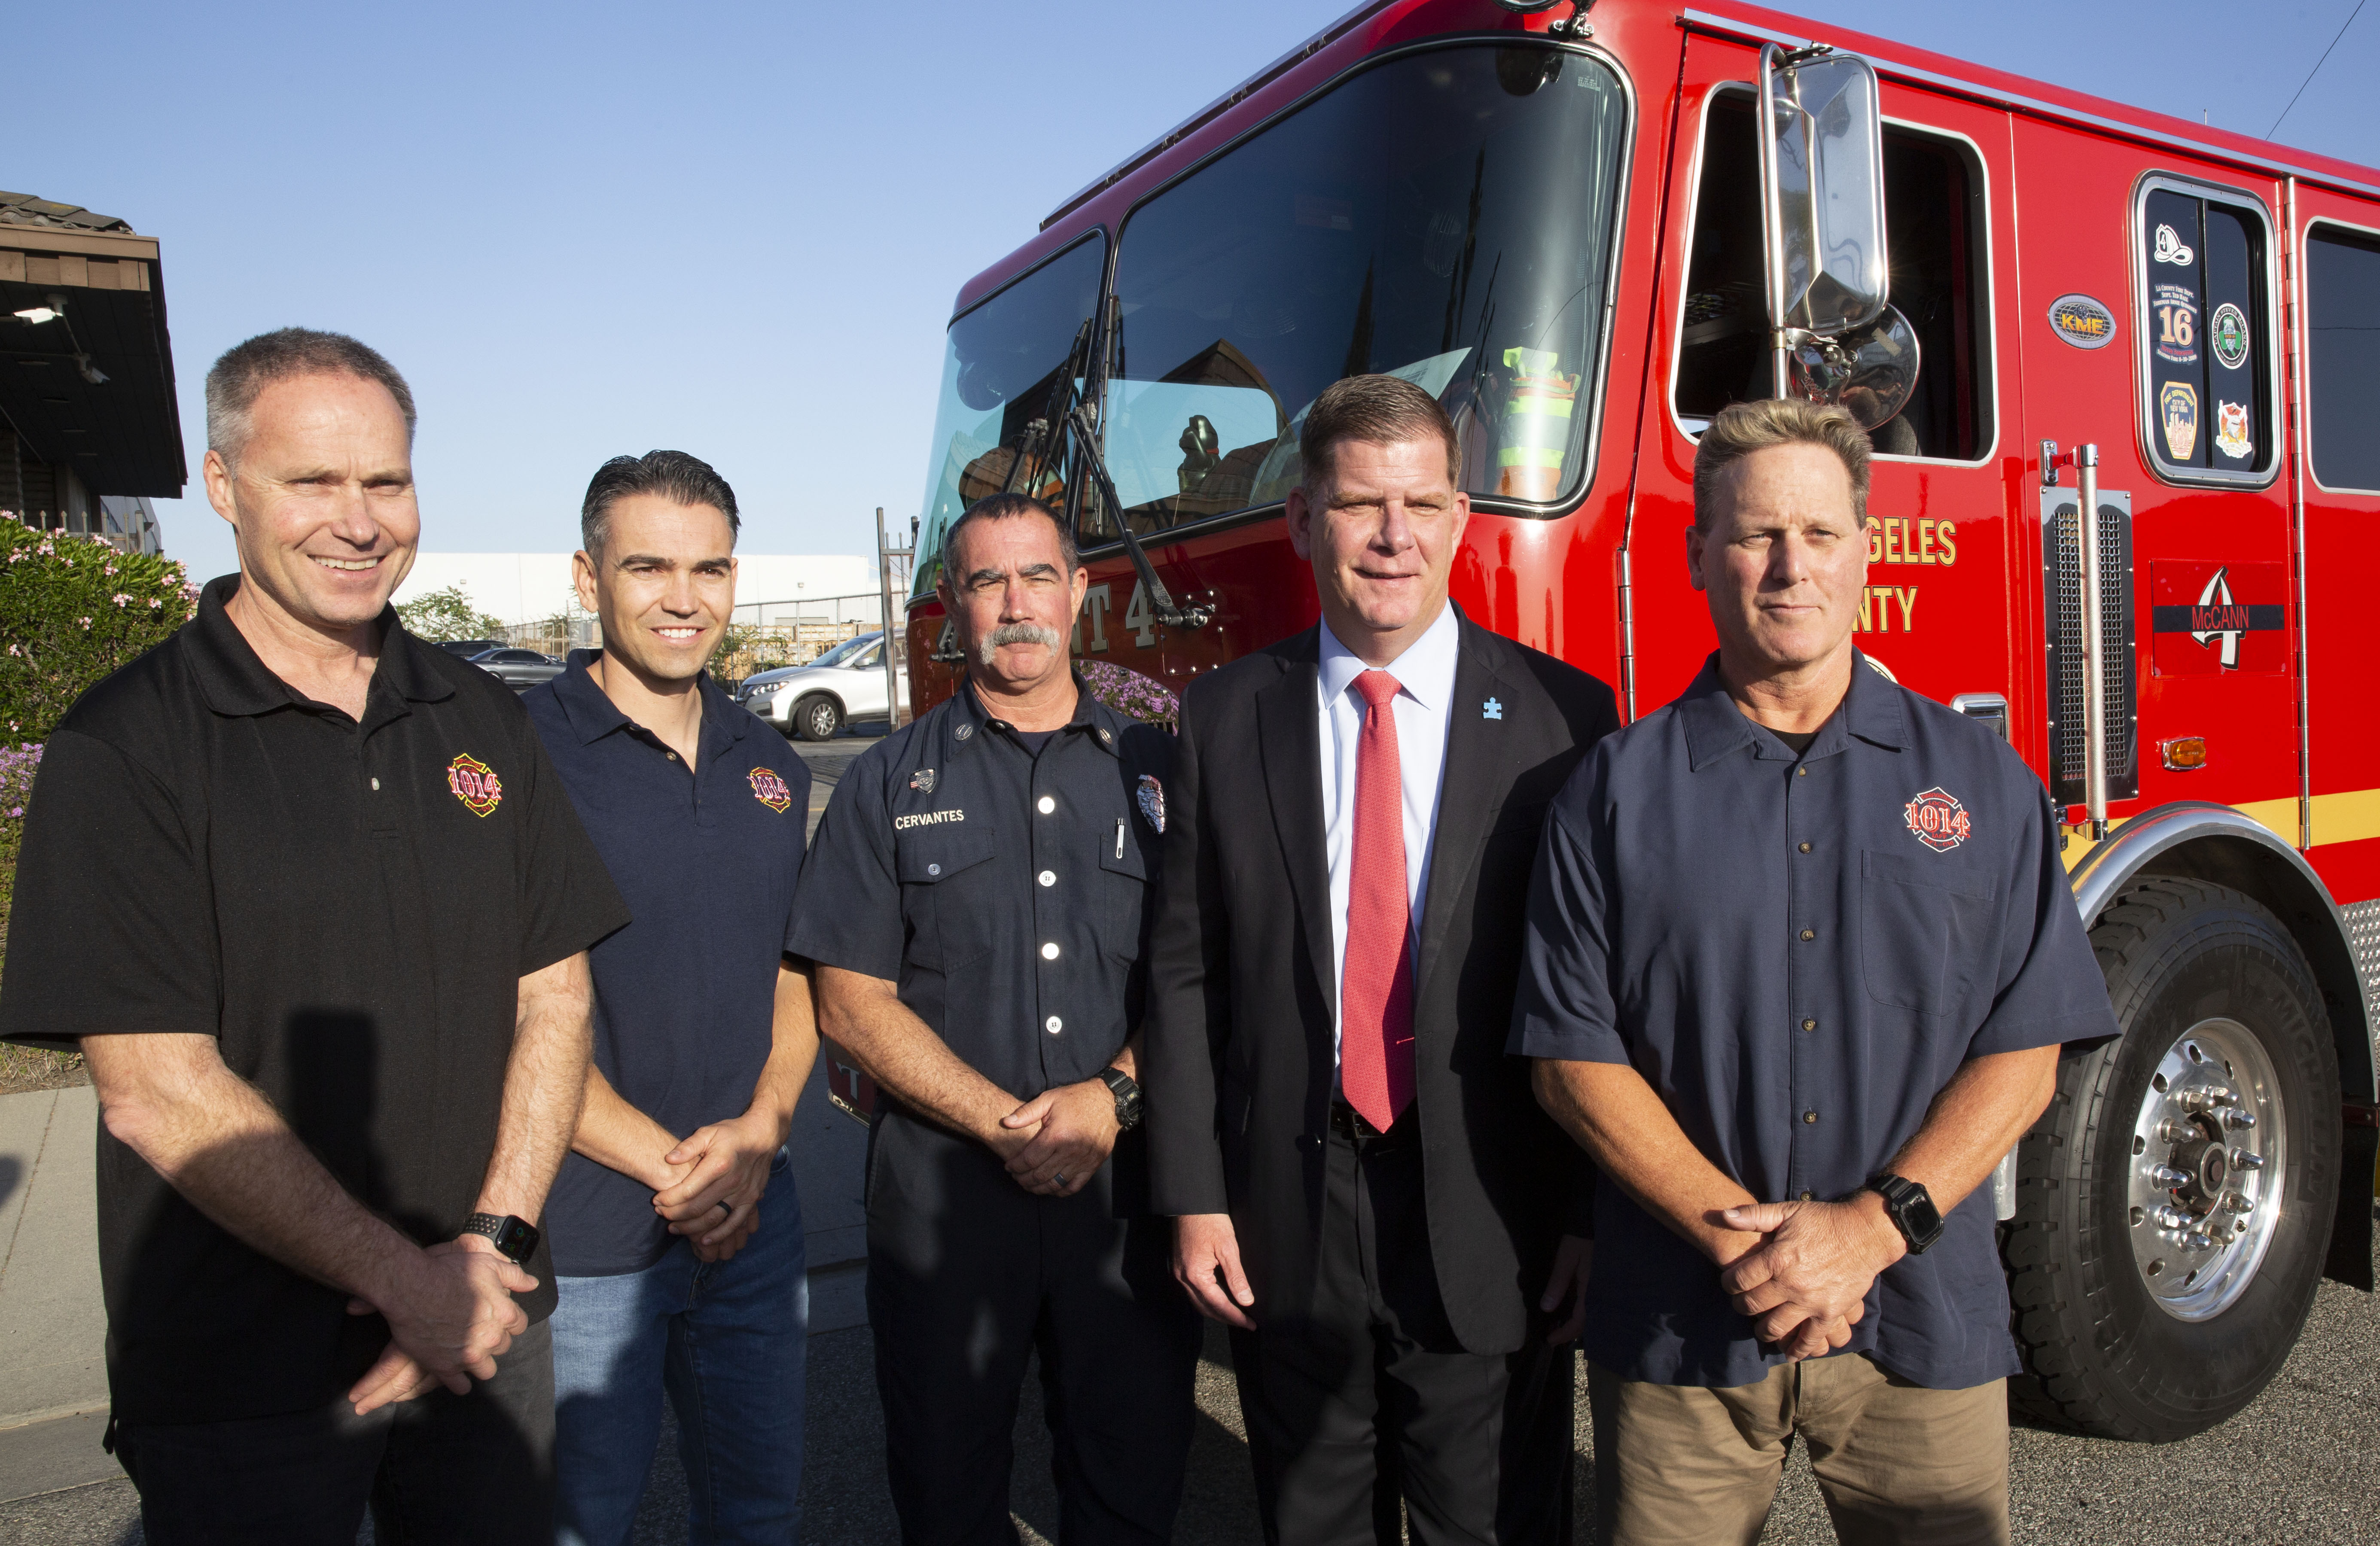 Secretary Walsh with federal firefighters in California